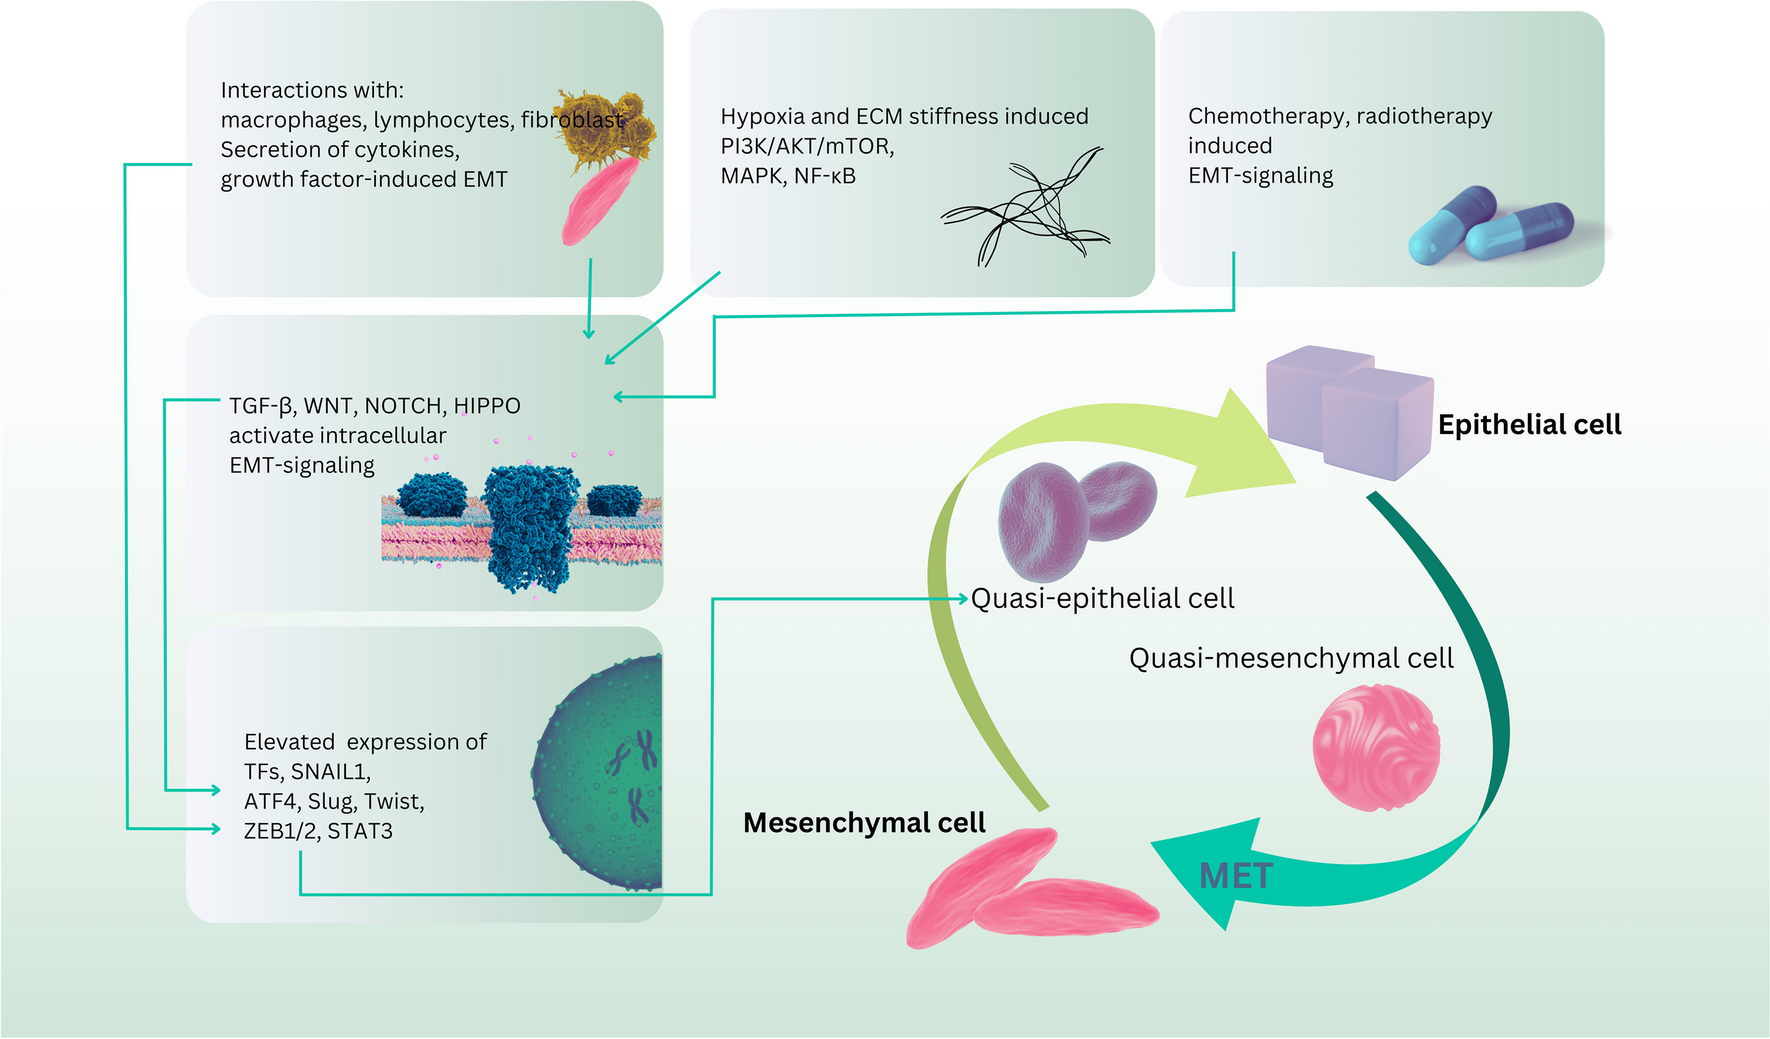 Targeting the key players of phenotypic plasticity in cancer cells by phytochemicals